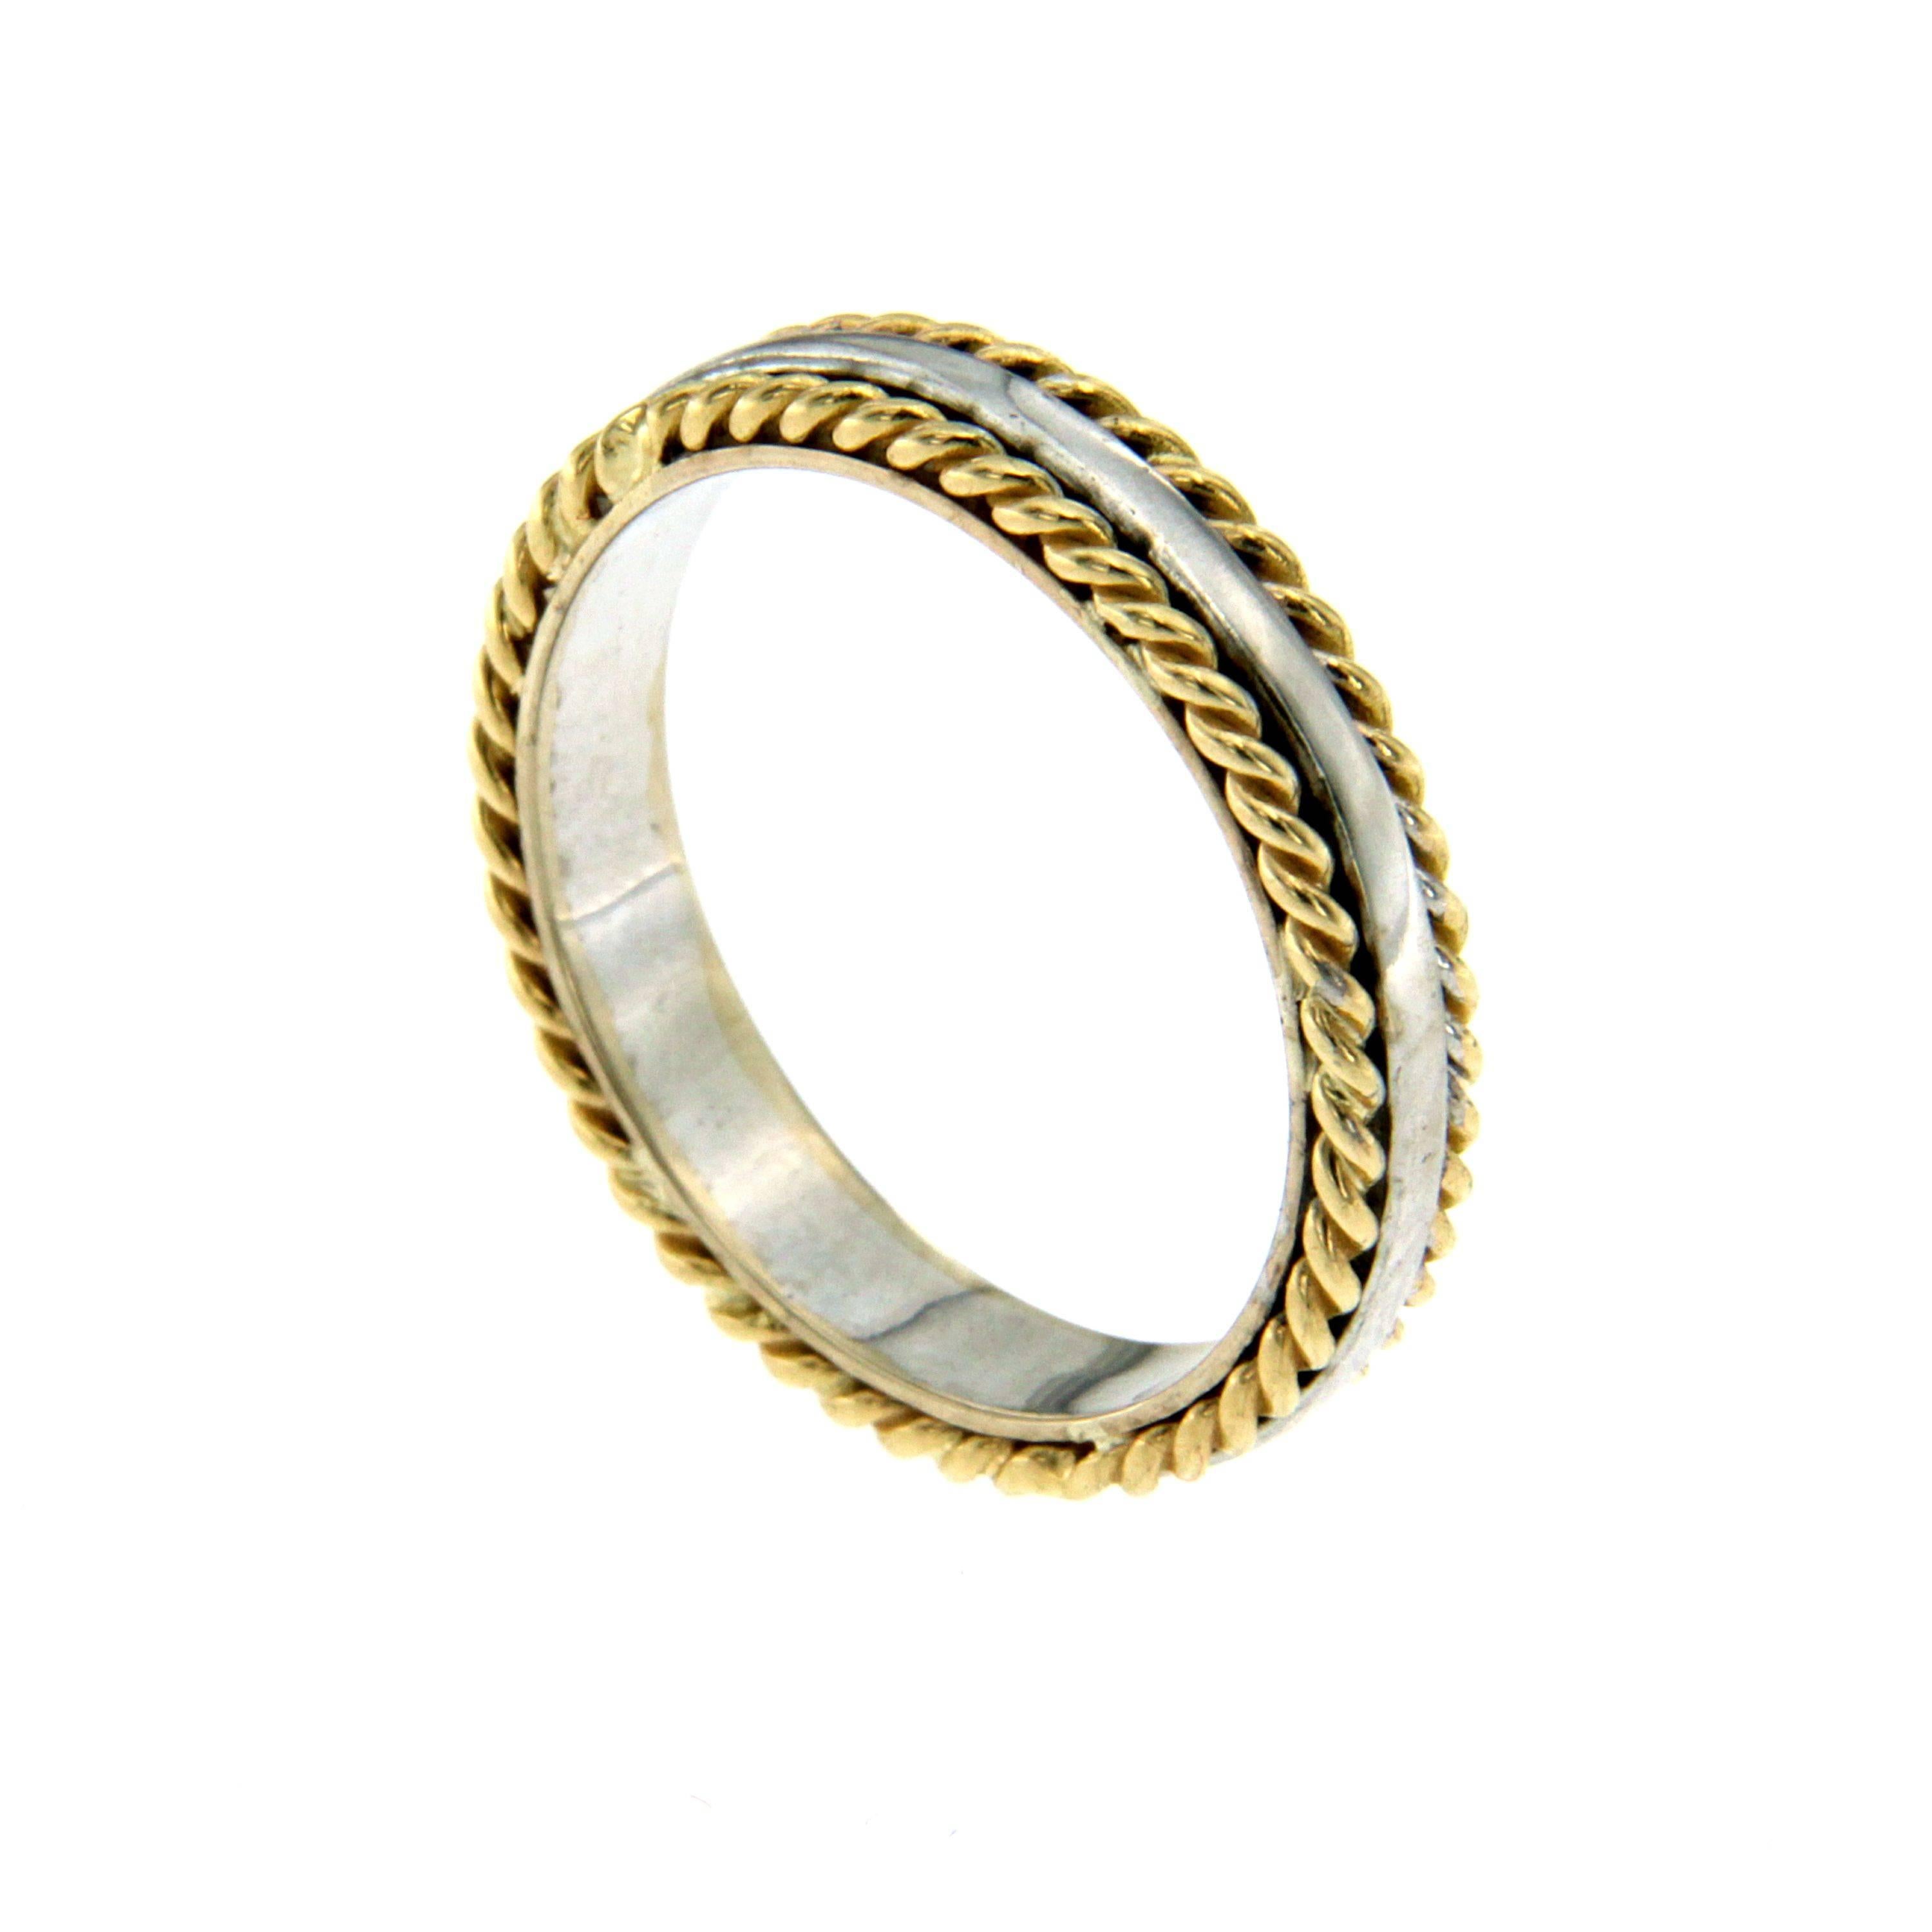 An extraordinary collection for both men and women, Classic and elegant wedding band ring. Textured edges add a modern touch to this design.

CONDITION: Brand New 
METAL: 18k yellow and white Gold
4 mm Wide
DESIGN ERA: Contemporary
RING SIZE: US 5-6